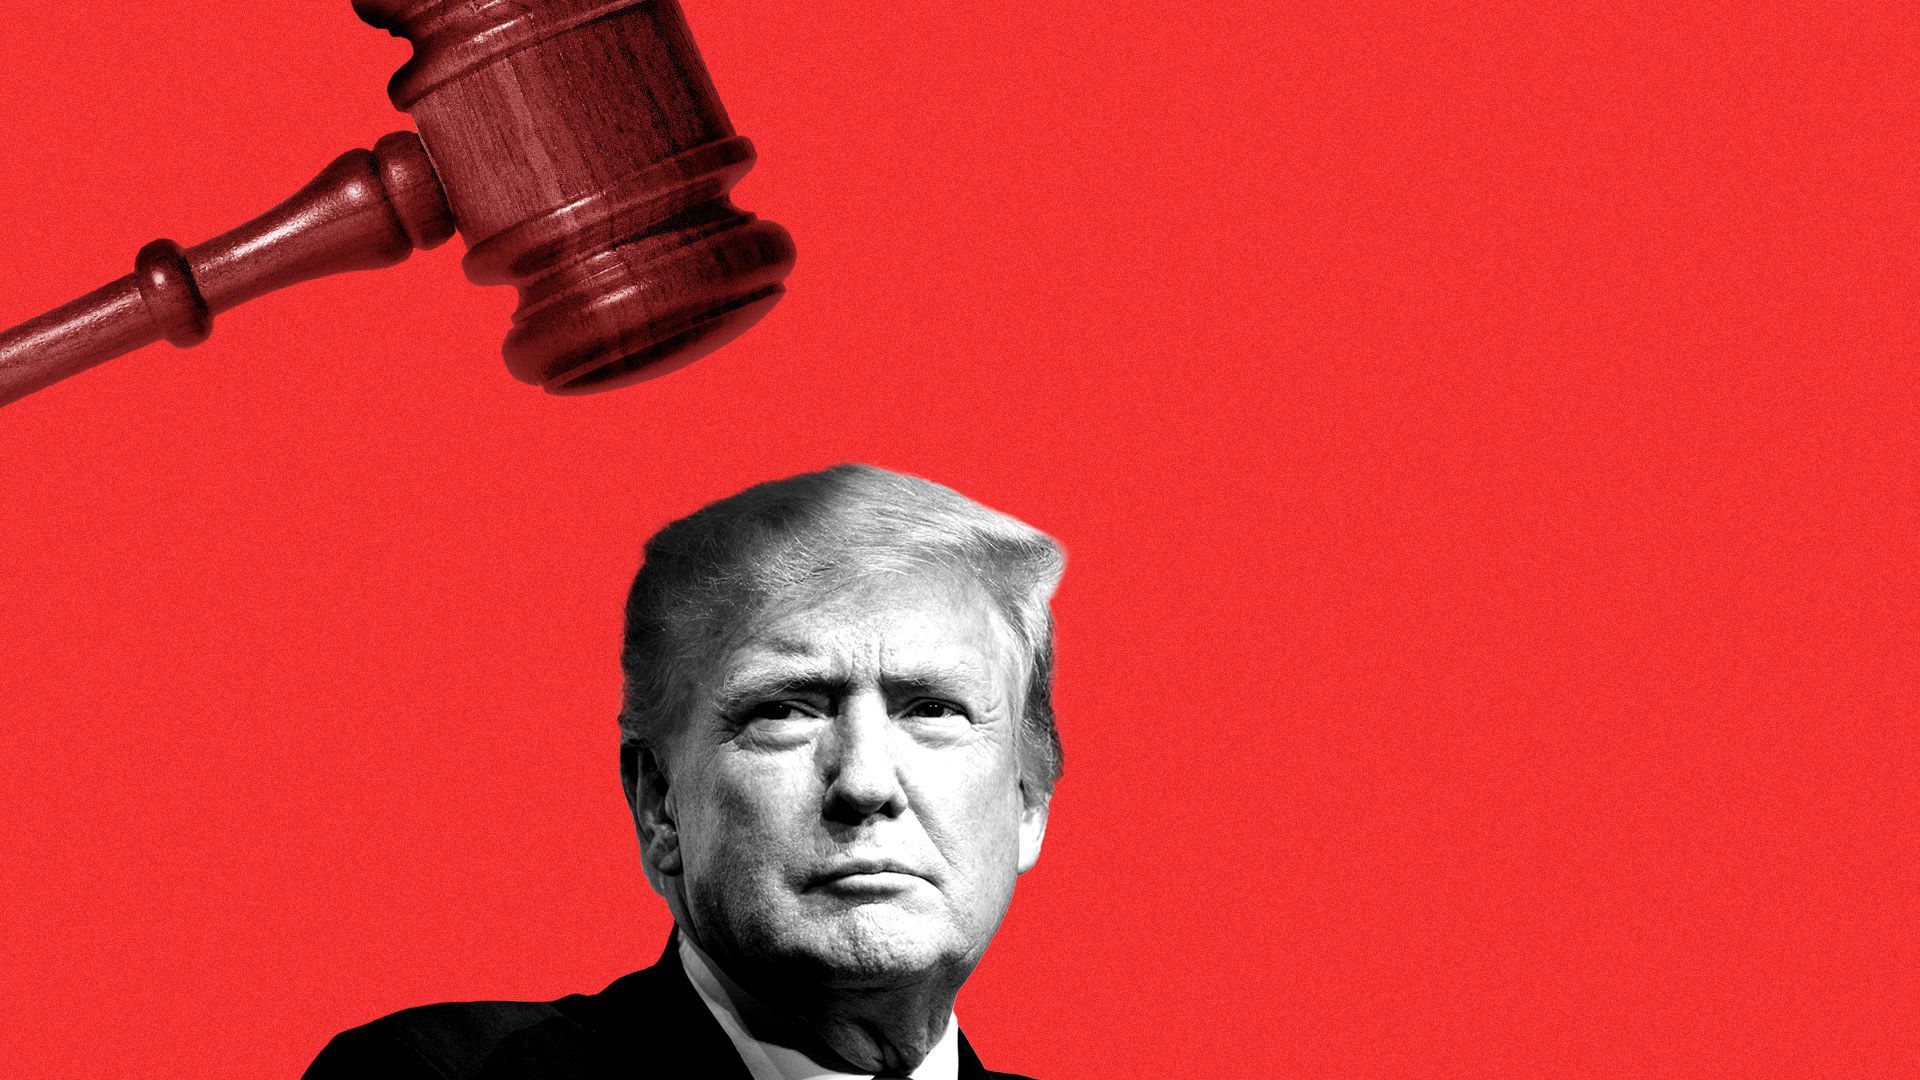 Illustration of President Trump with a giant gavel over his head